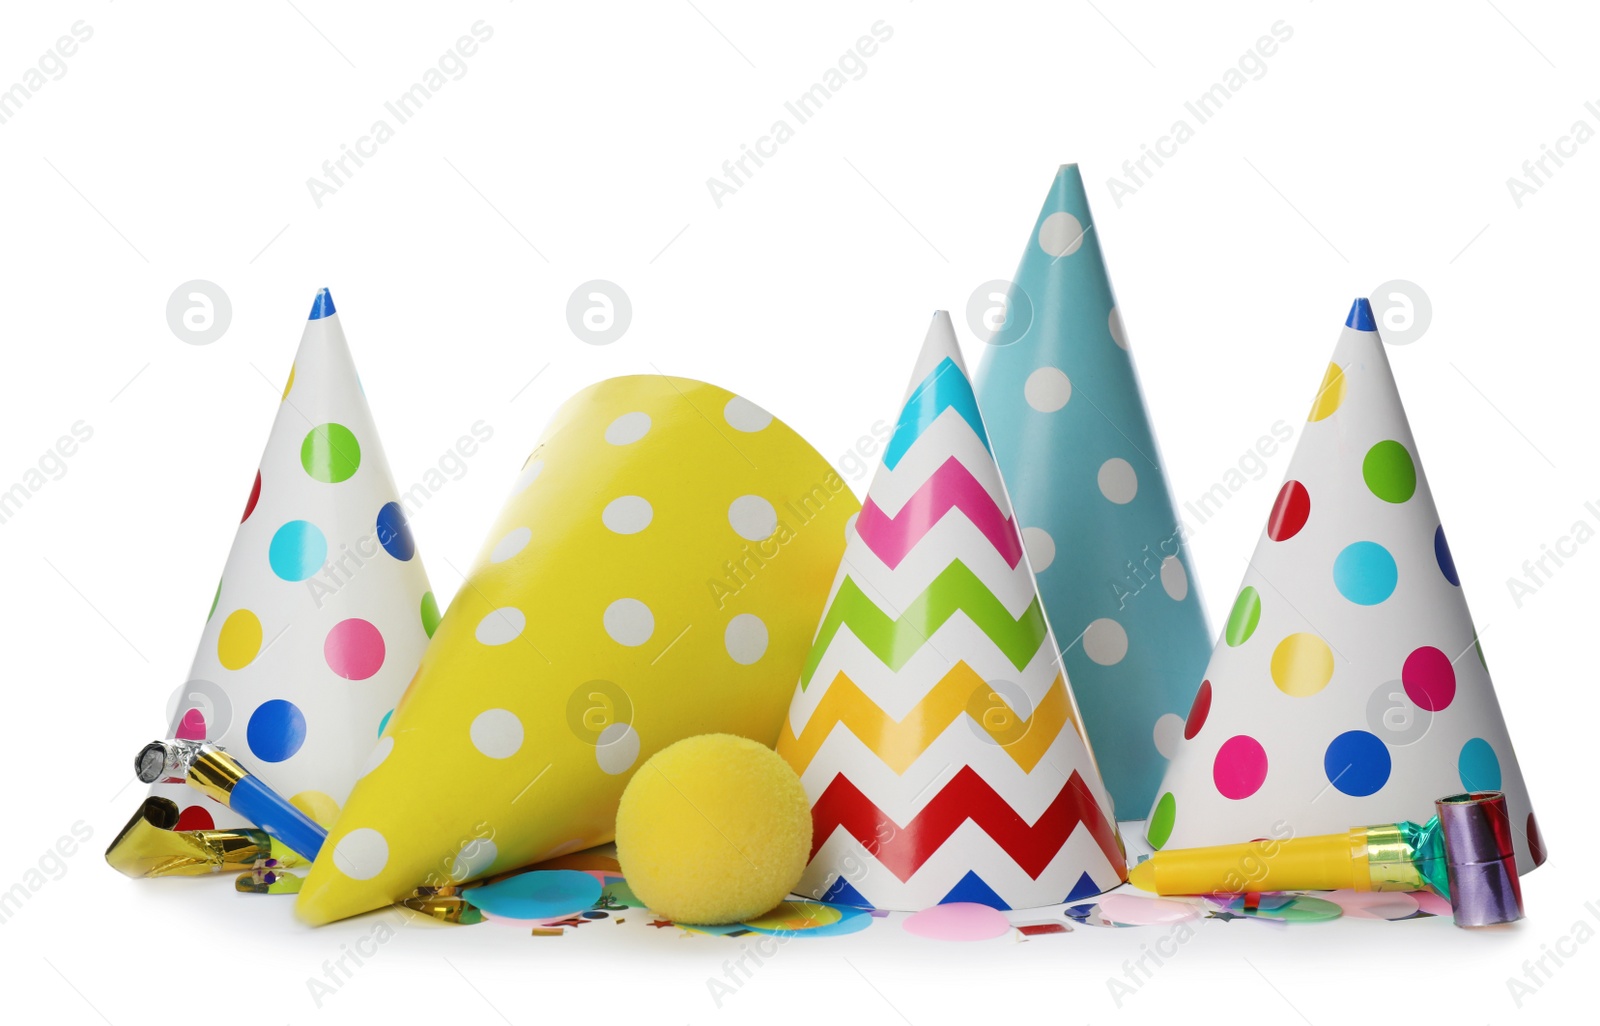 Photo of Colorful party hats and other festive items on white background